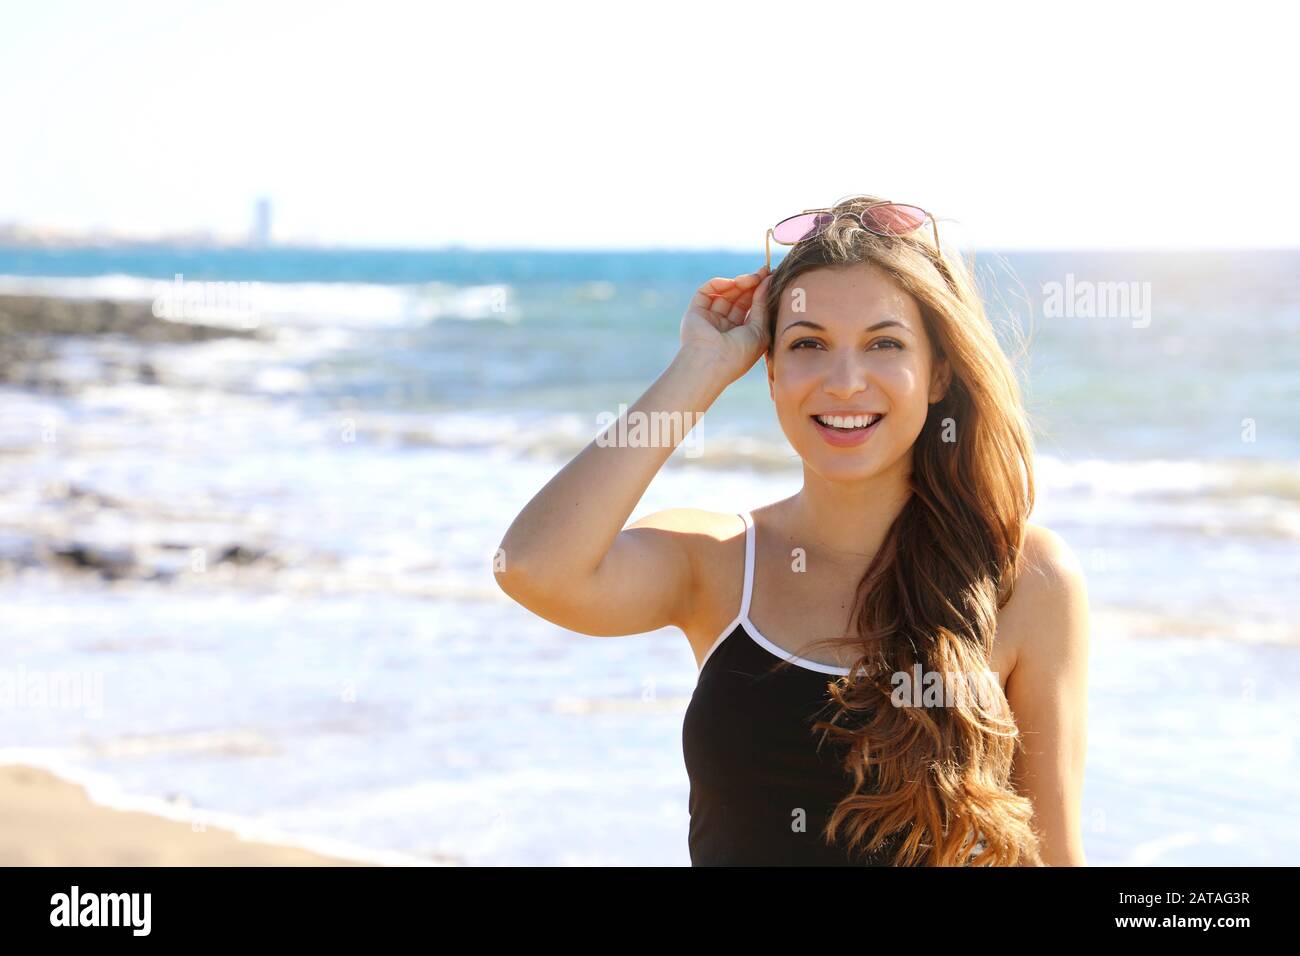 Pretty modern sporty woman with sunglasses on her head looking happy smiling at camera on the beach Stock Photo